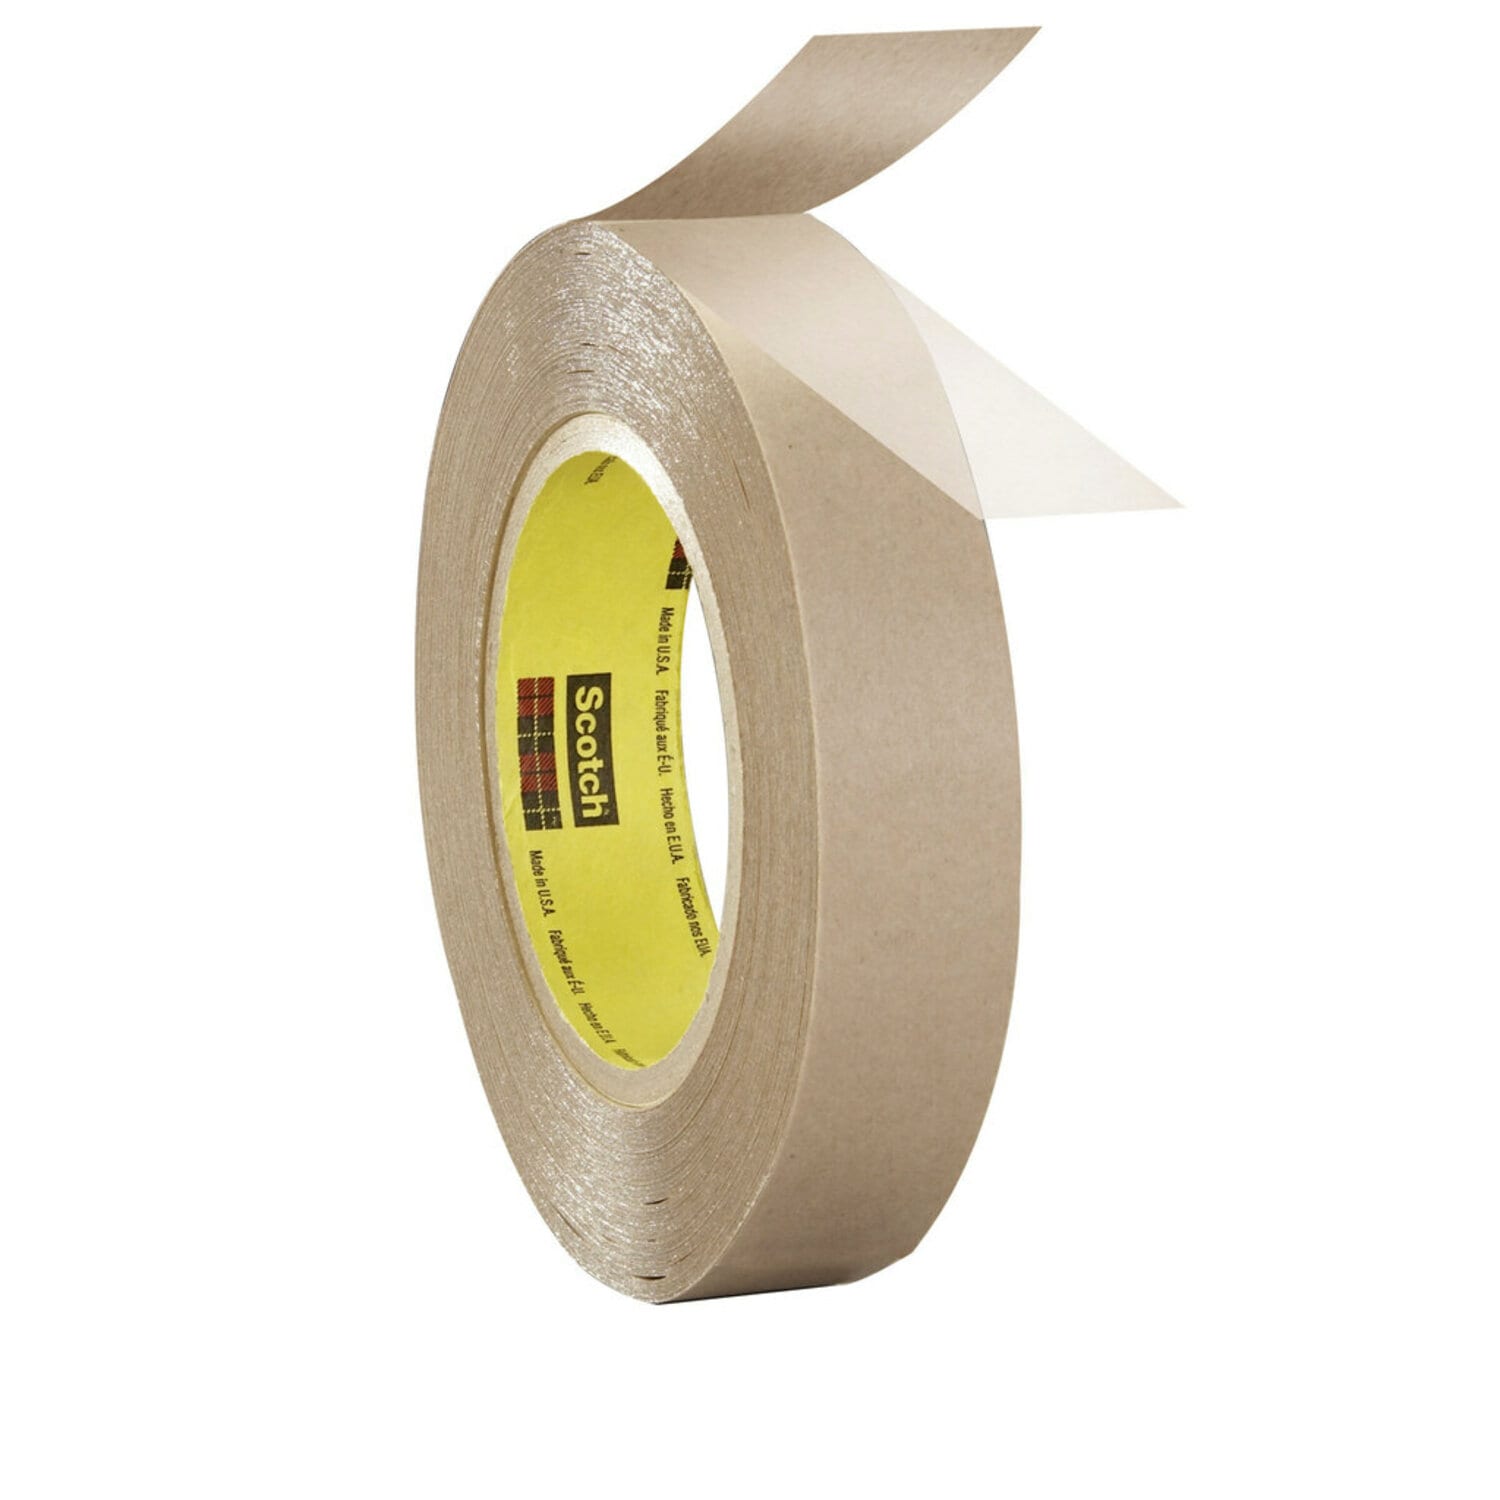 7010335006 - 3M Double Coated Tape 9832, Clear, 1/2 in x 60 yd, 4.8 mil, 72 rolls
per case